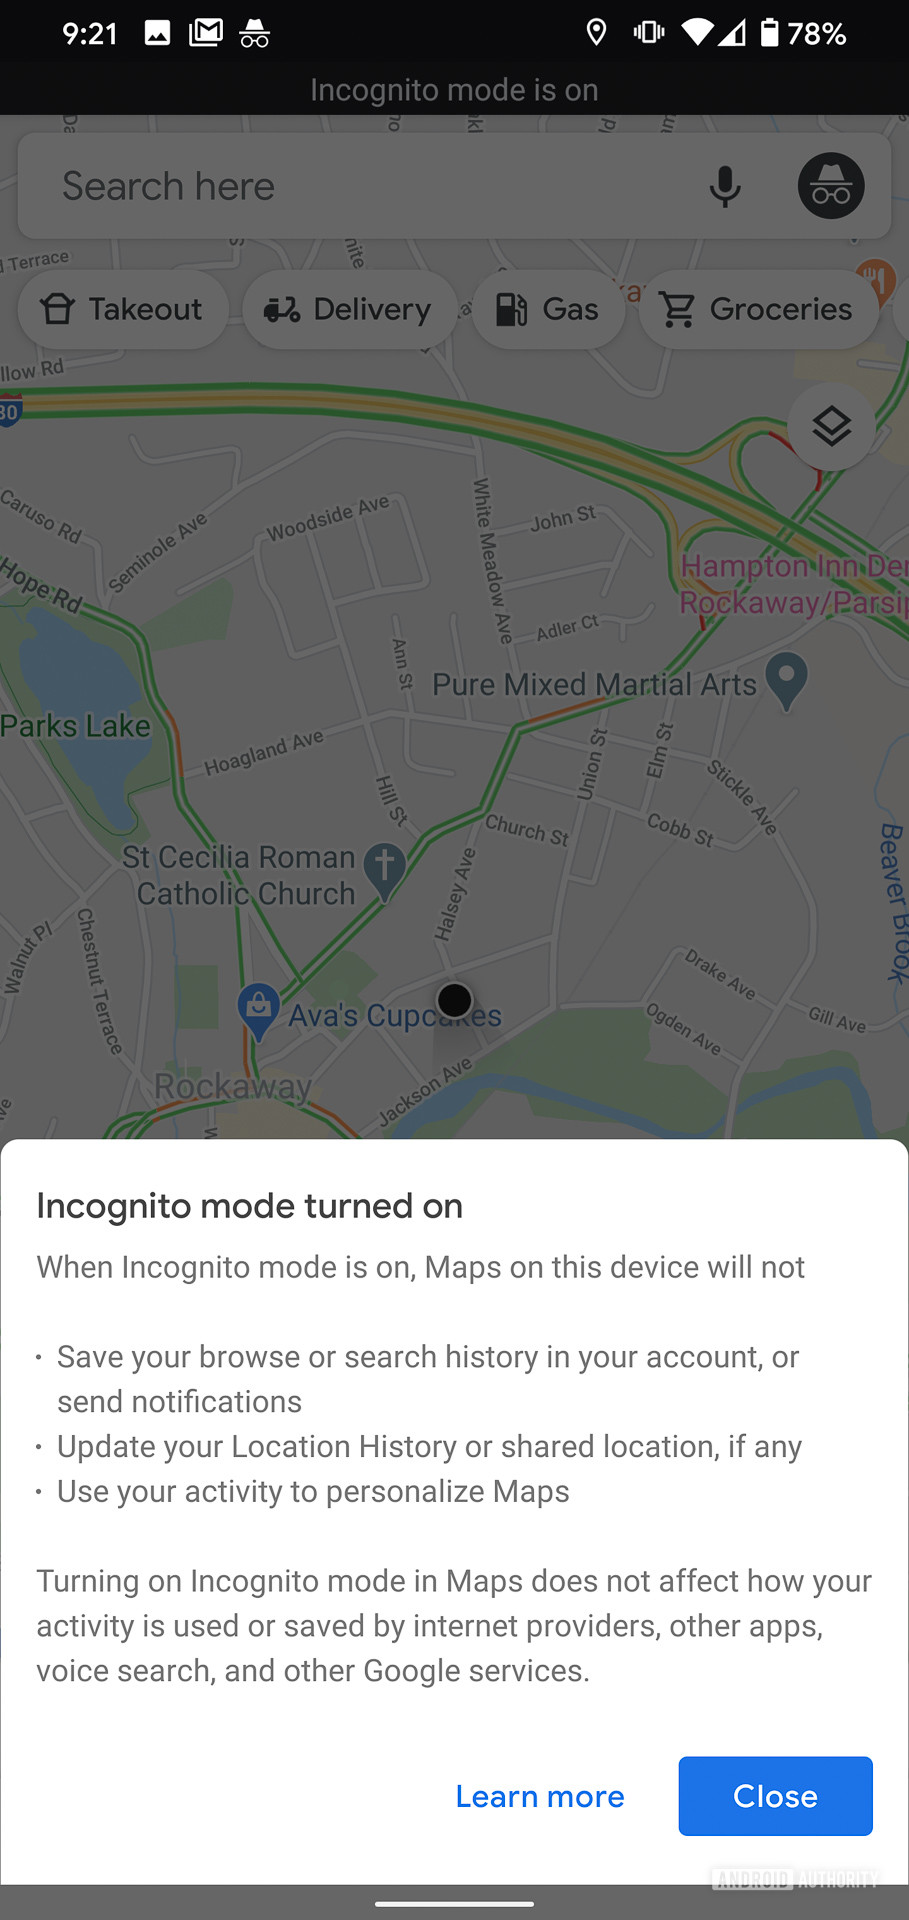 Google Maps Incognito Mode landing page